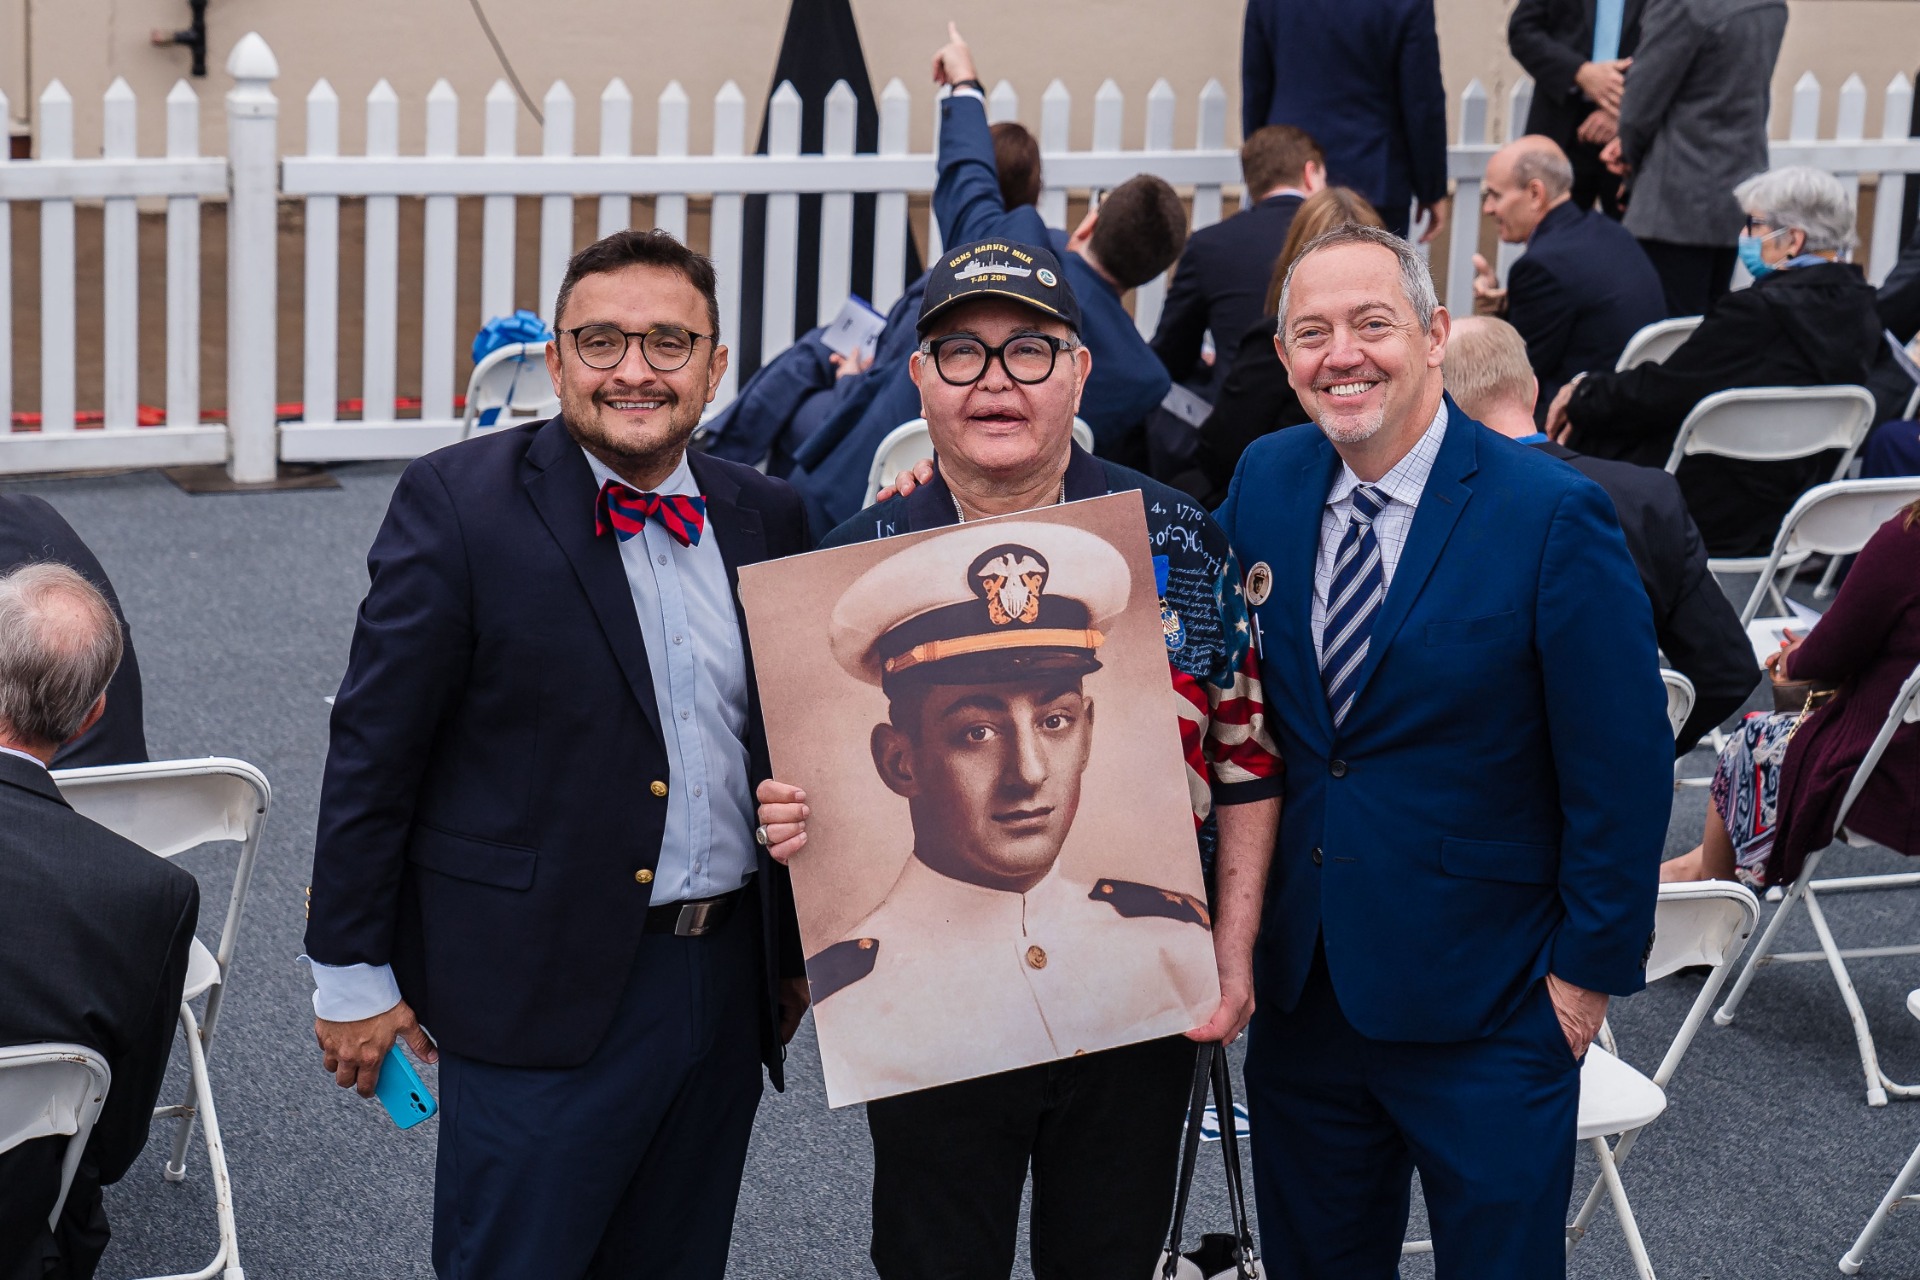 Three men stand together outside at an event with white chairs in the background. From left to right, a man in a bow tie and suit, another man in a navy hat and glasses holding a photo of Harvey Milk in naval uniform, and right, a smiling man in a suit with a goatee.